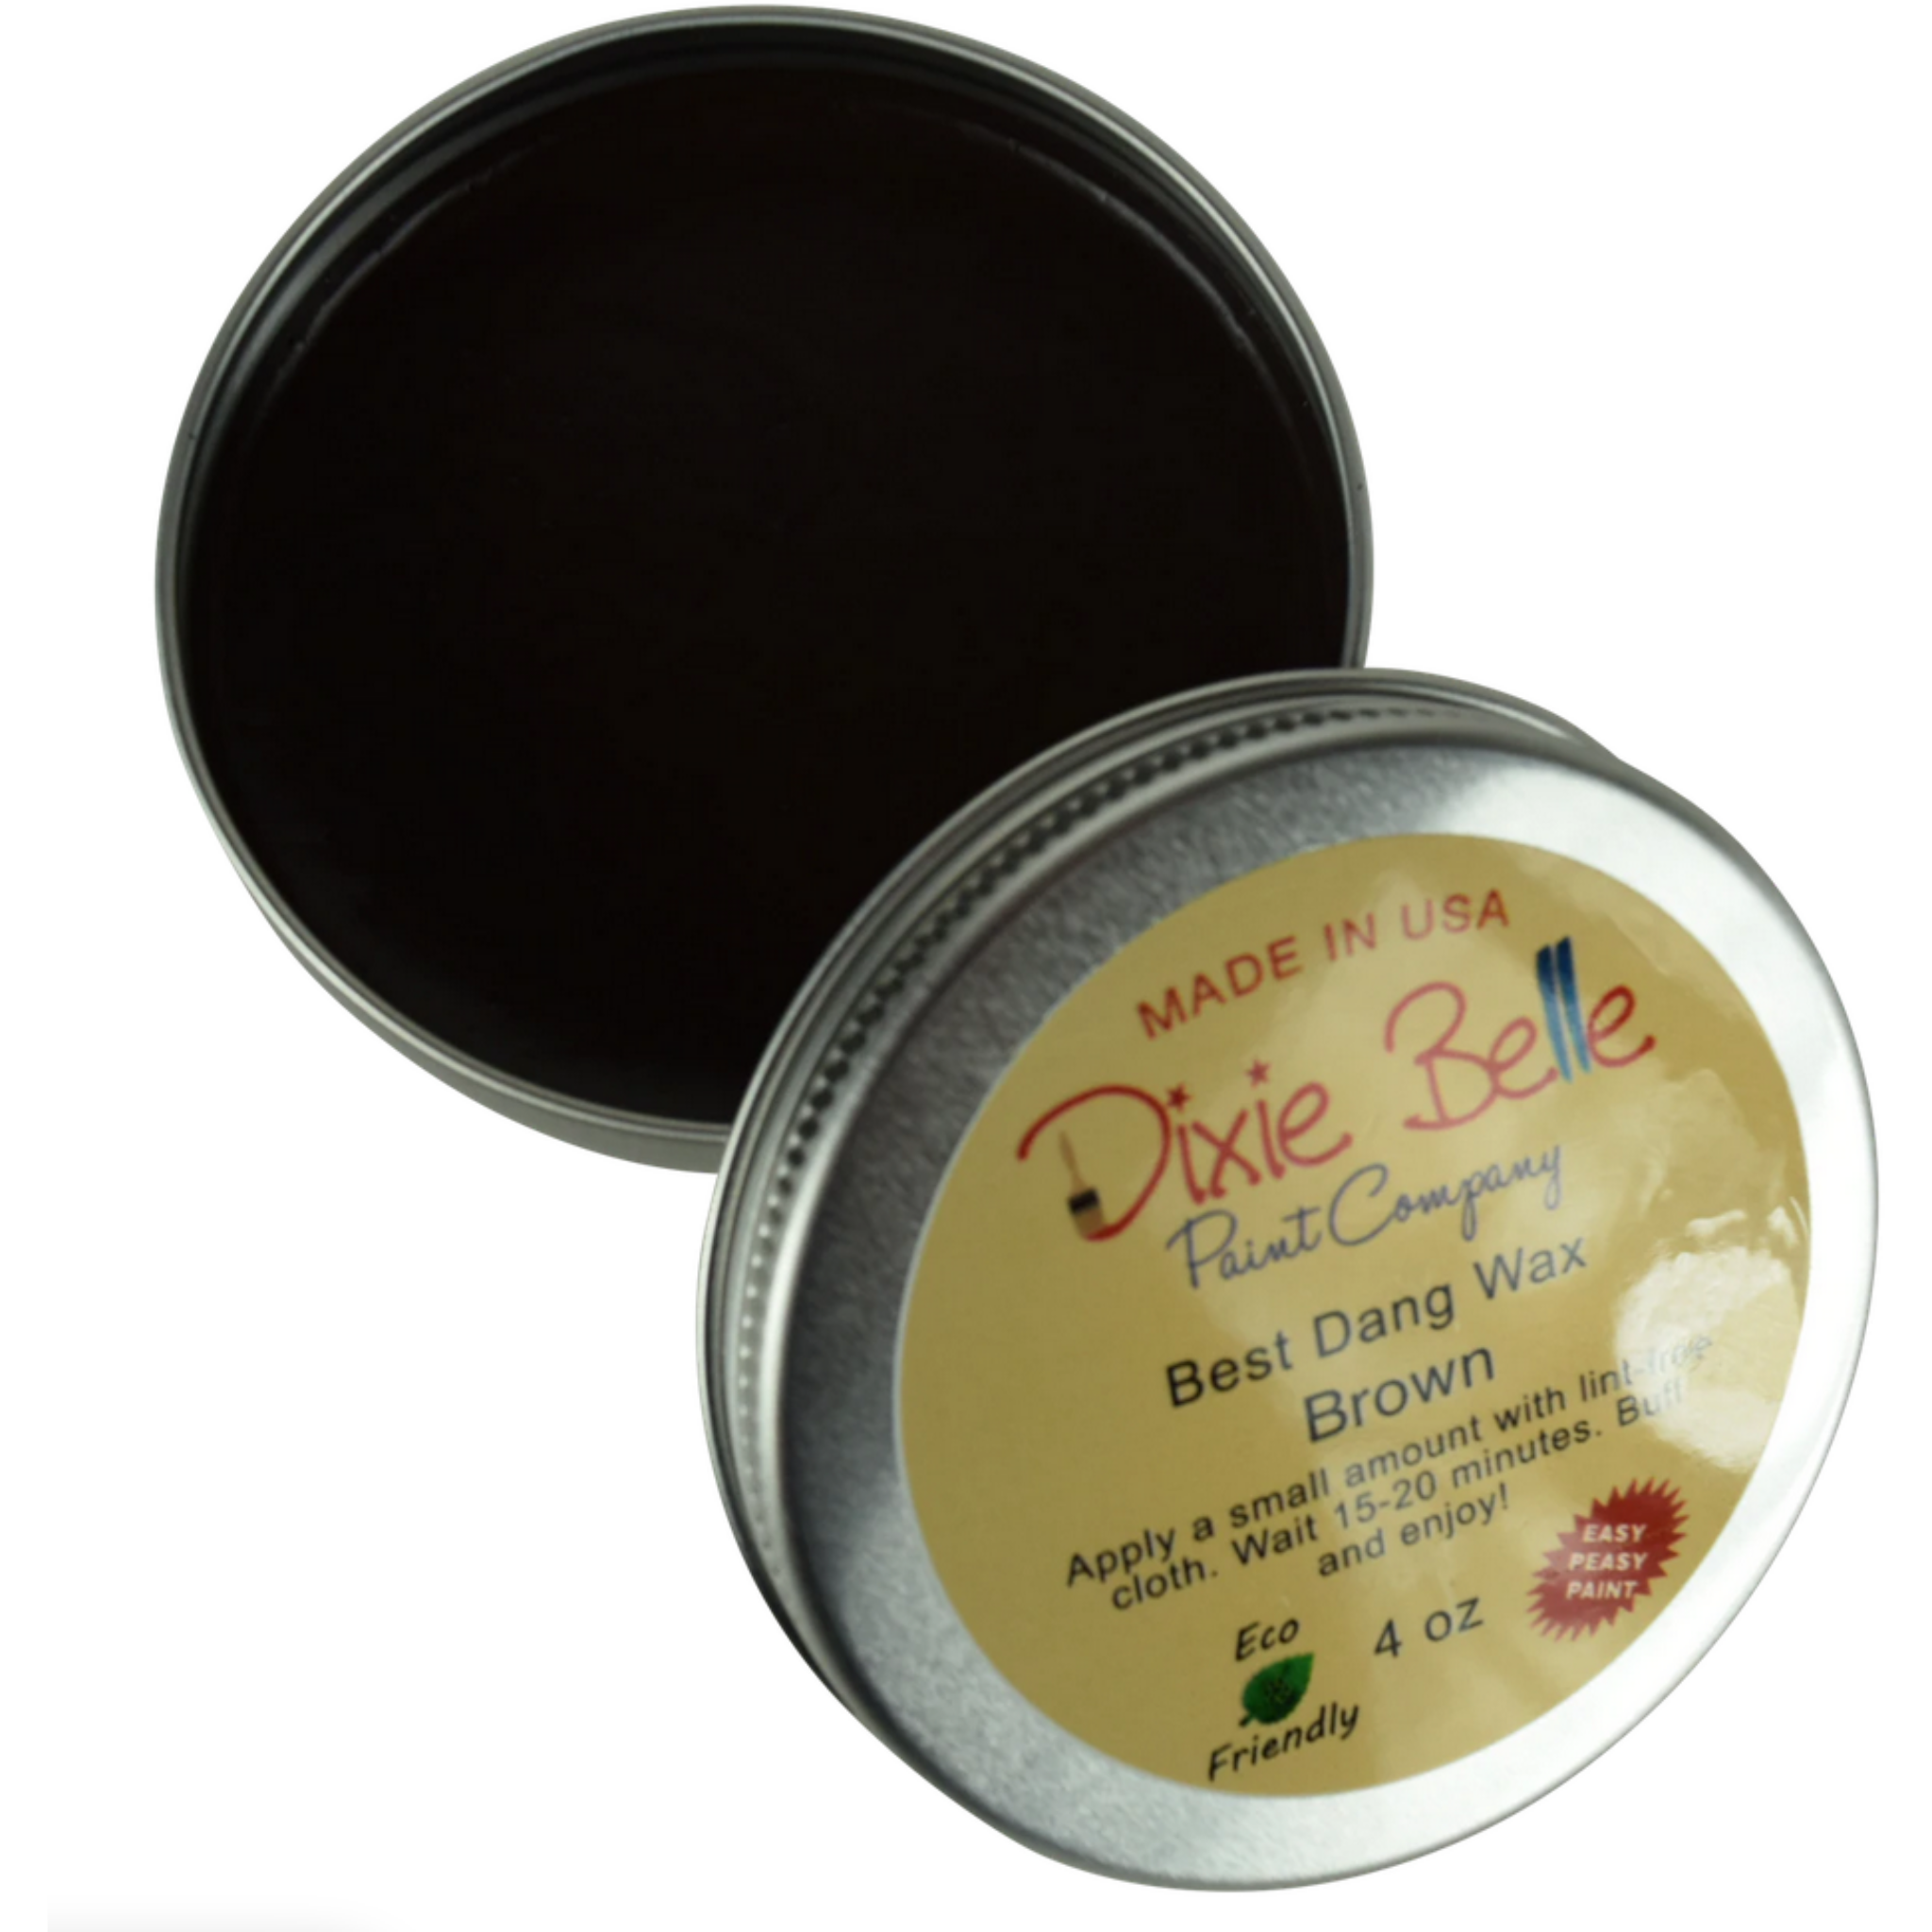 An open tin of Dixie Belle Paint's 4 ounce Brown Best Dang Wax is against a white background.